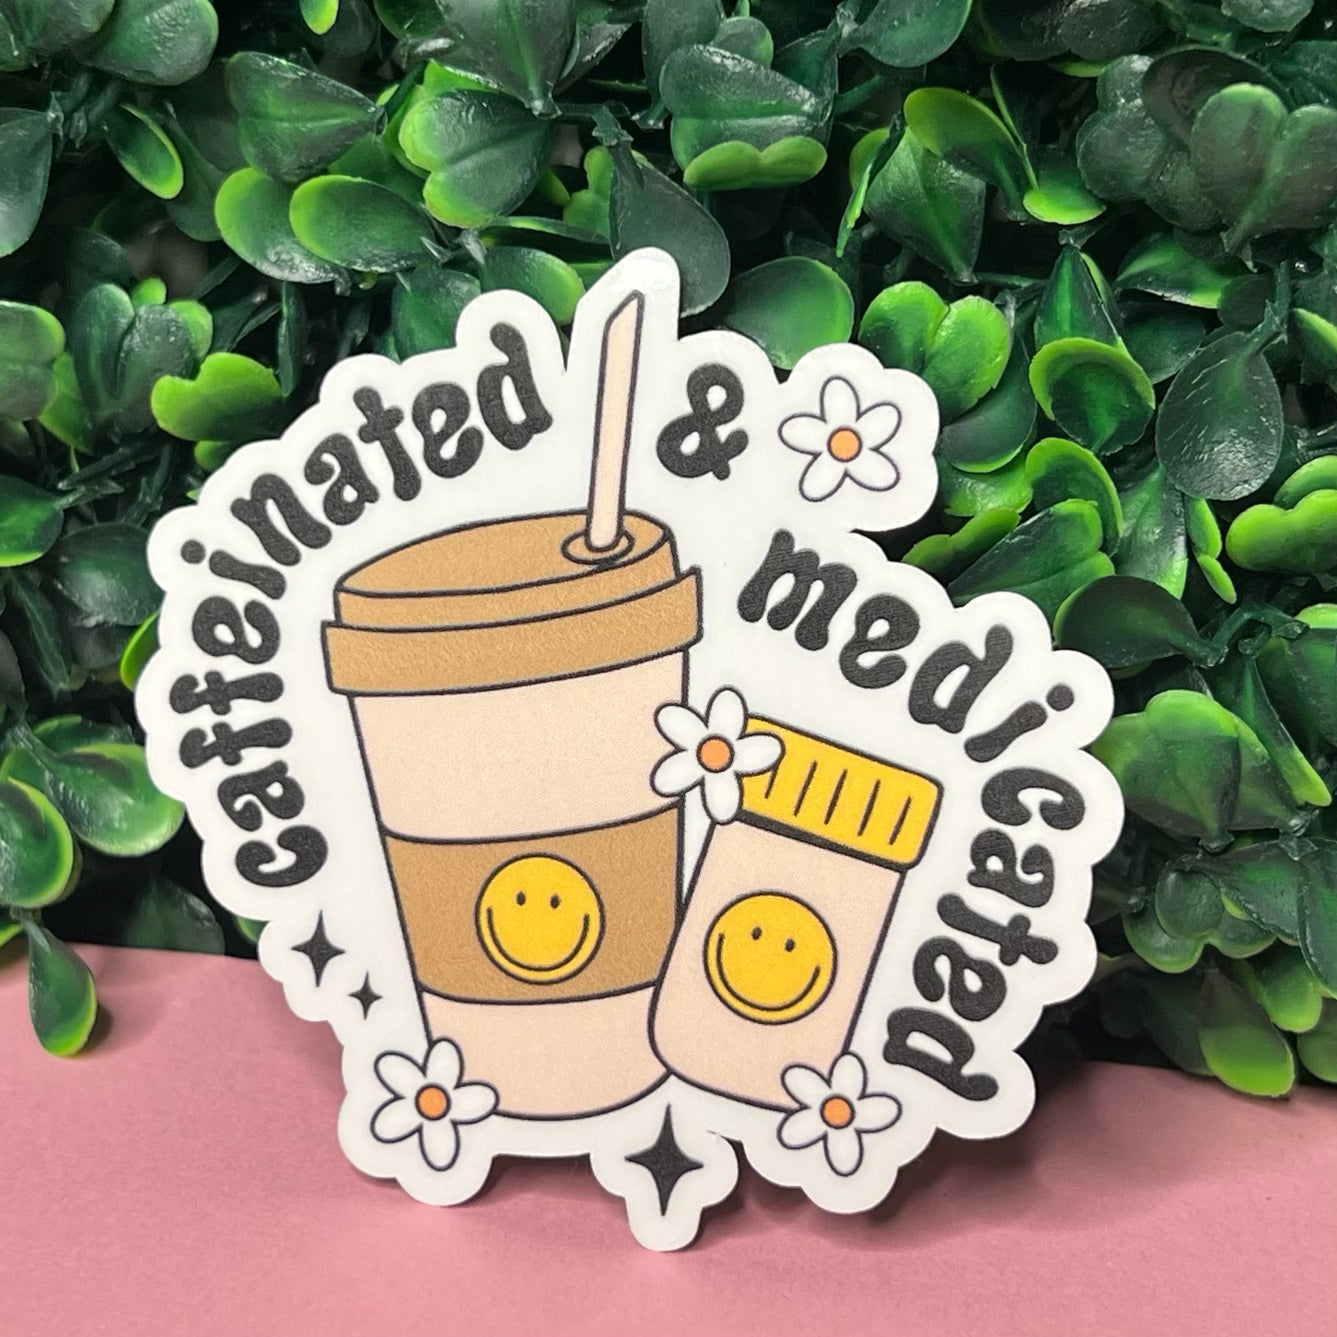 Caffeinated and Medicated Sticker